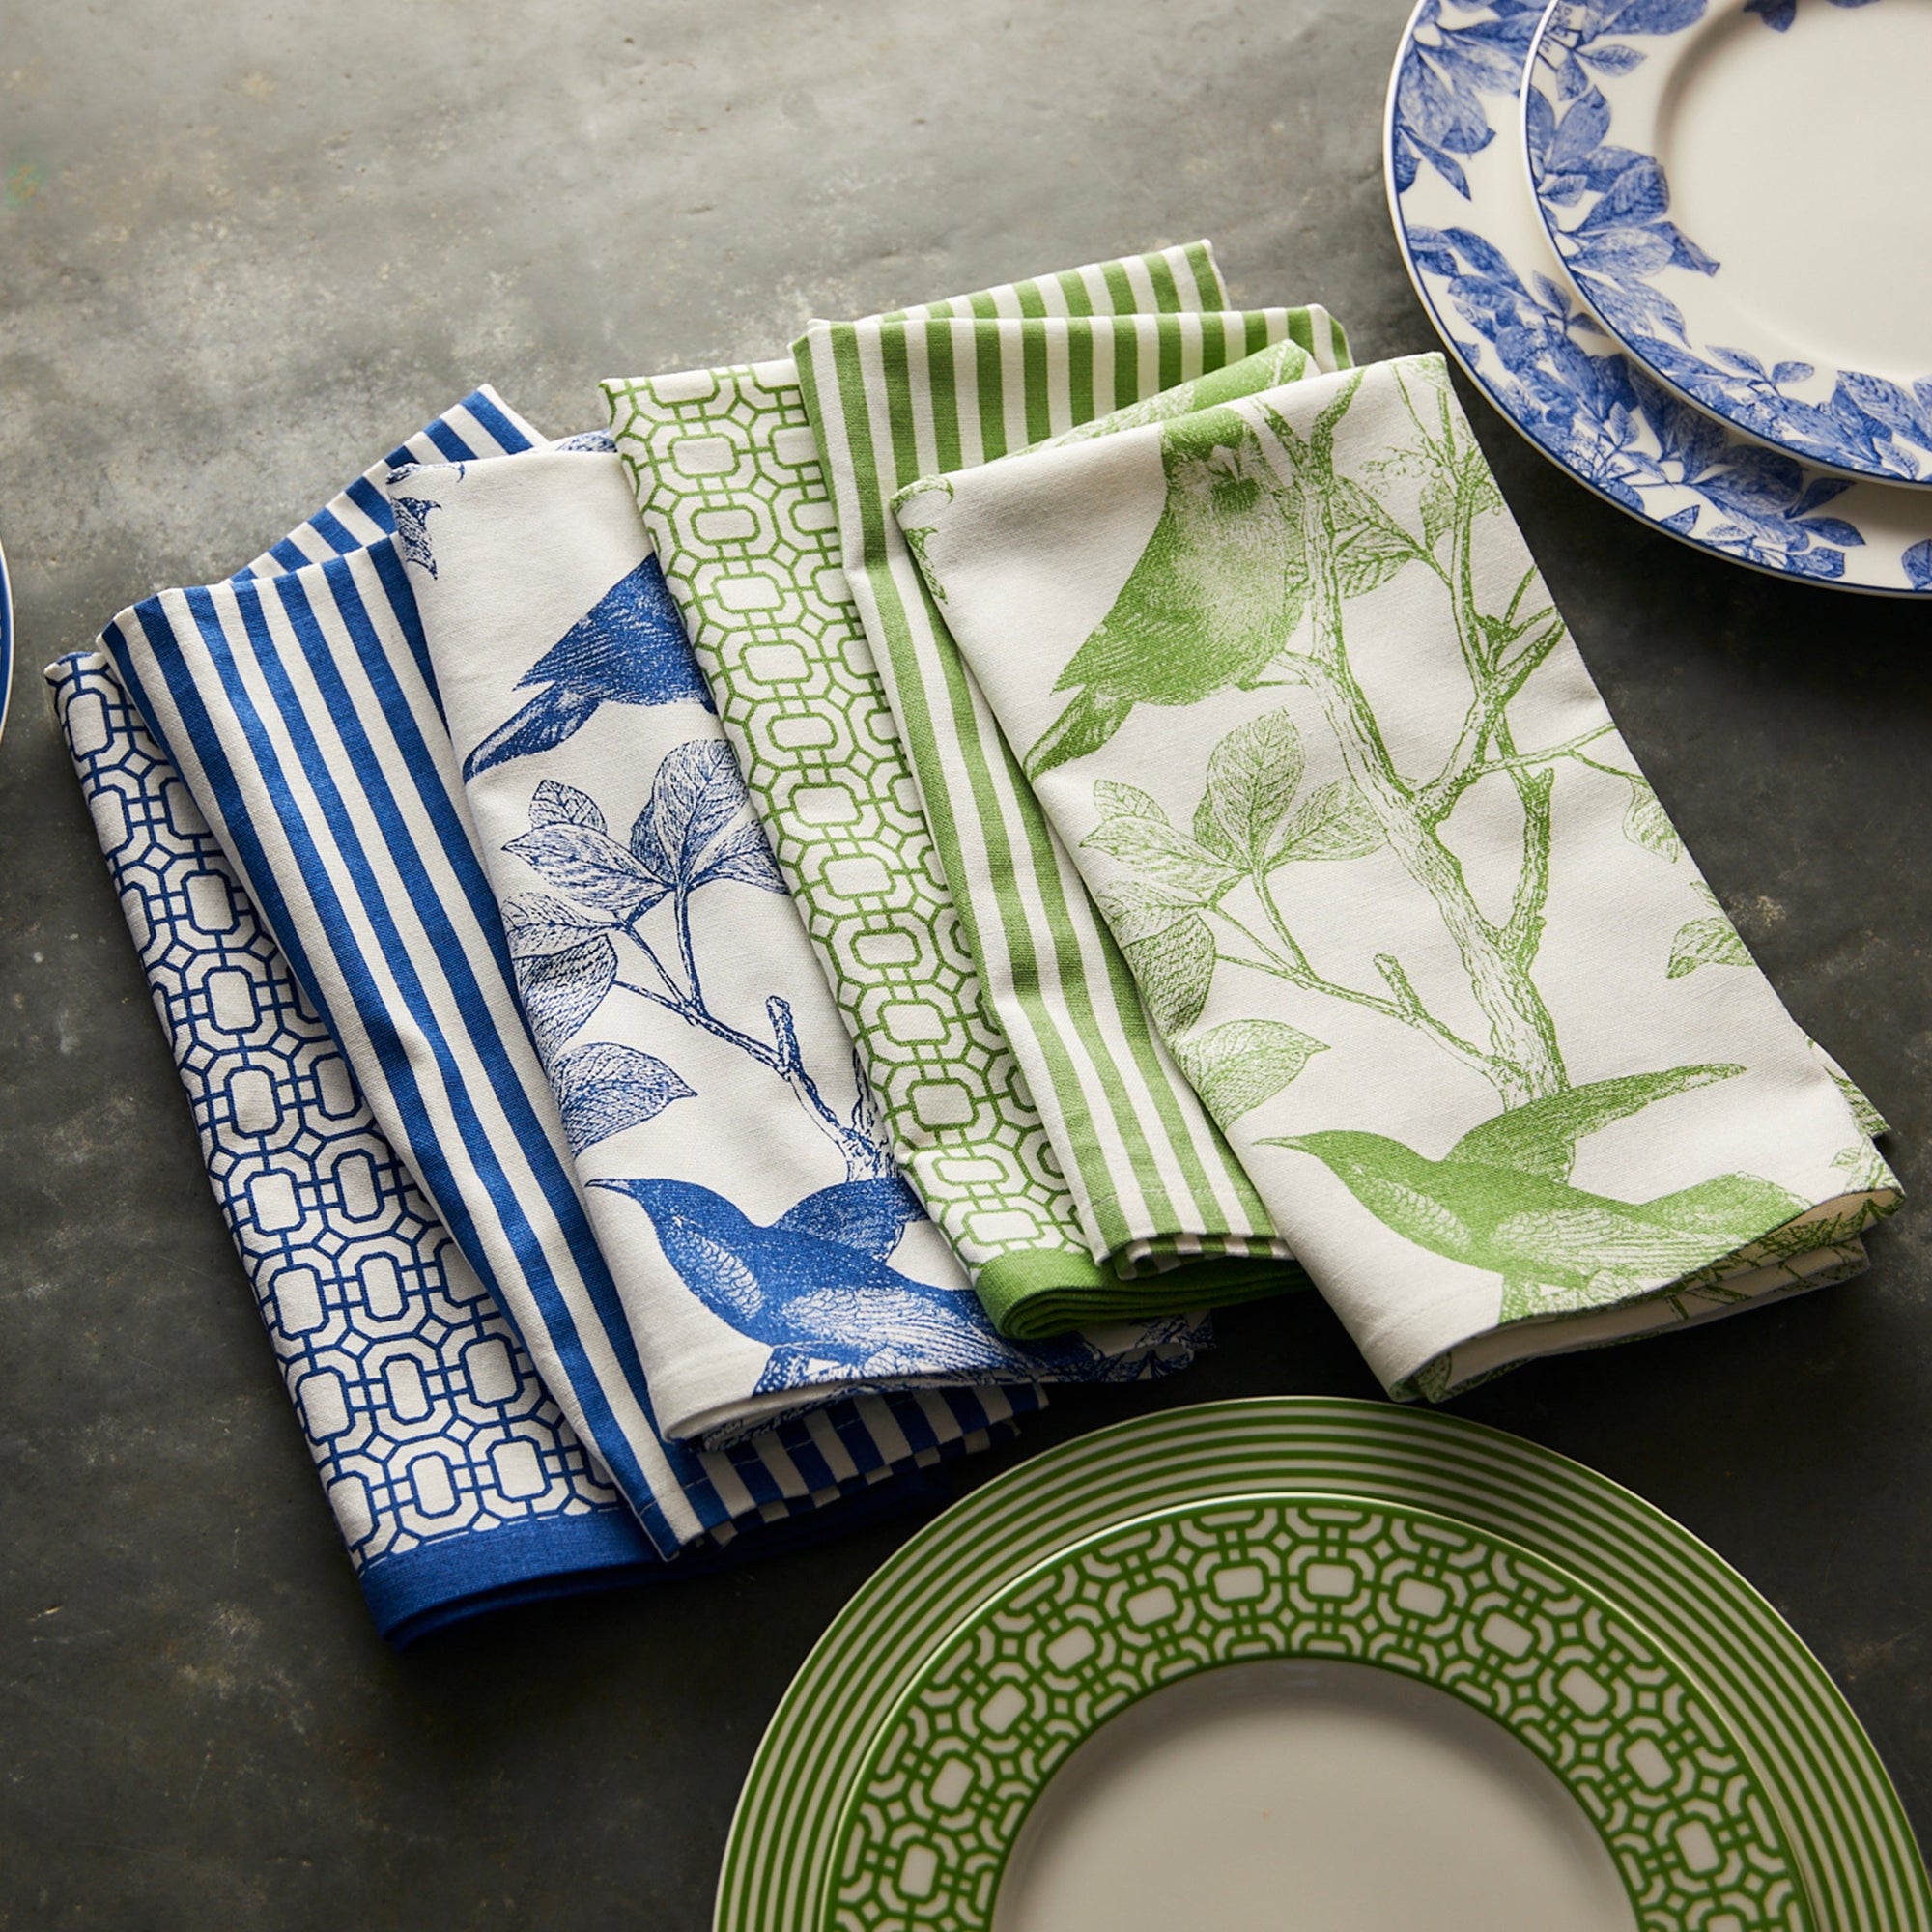 New Oversized Dinner Napkins in 100% cotton from Caskata in Shades of Green & Blue.